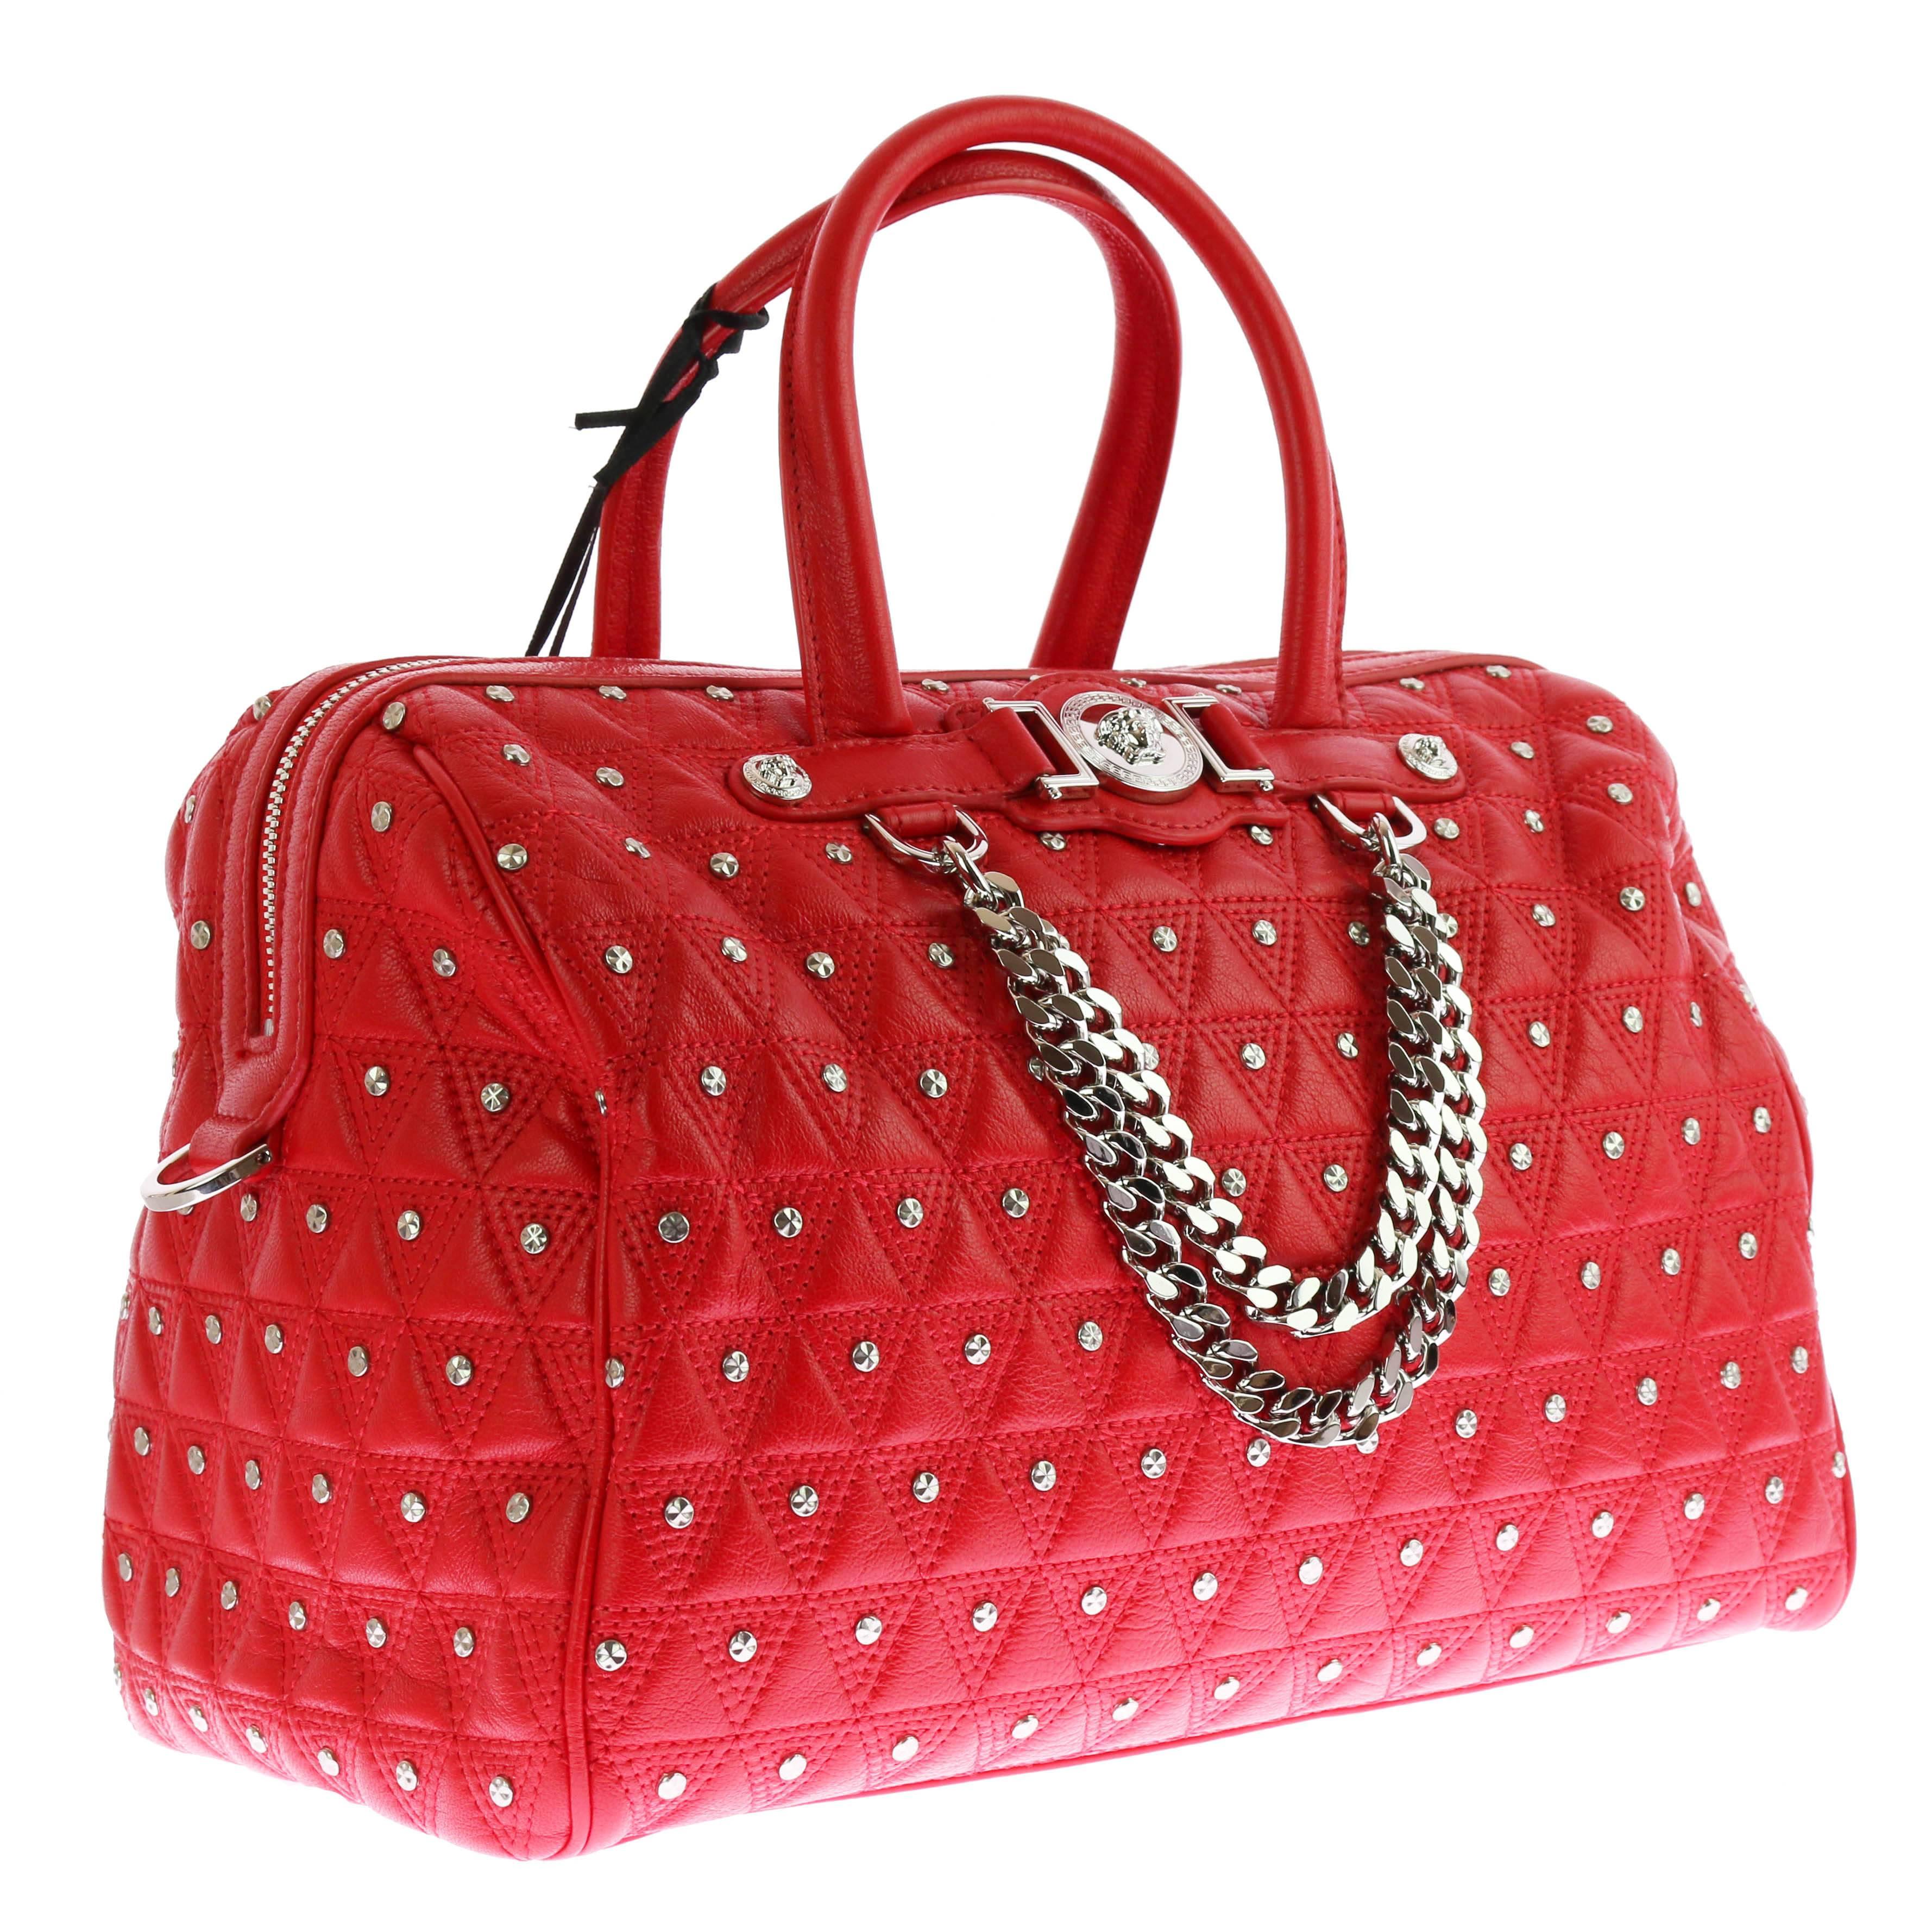 VERSACE "Signature" Studded Red Leather Duffle Bag